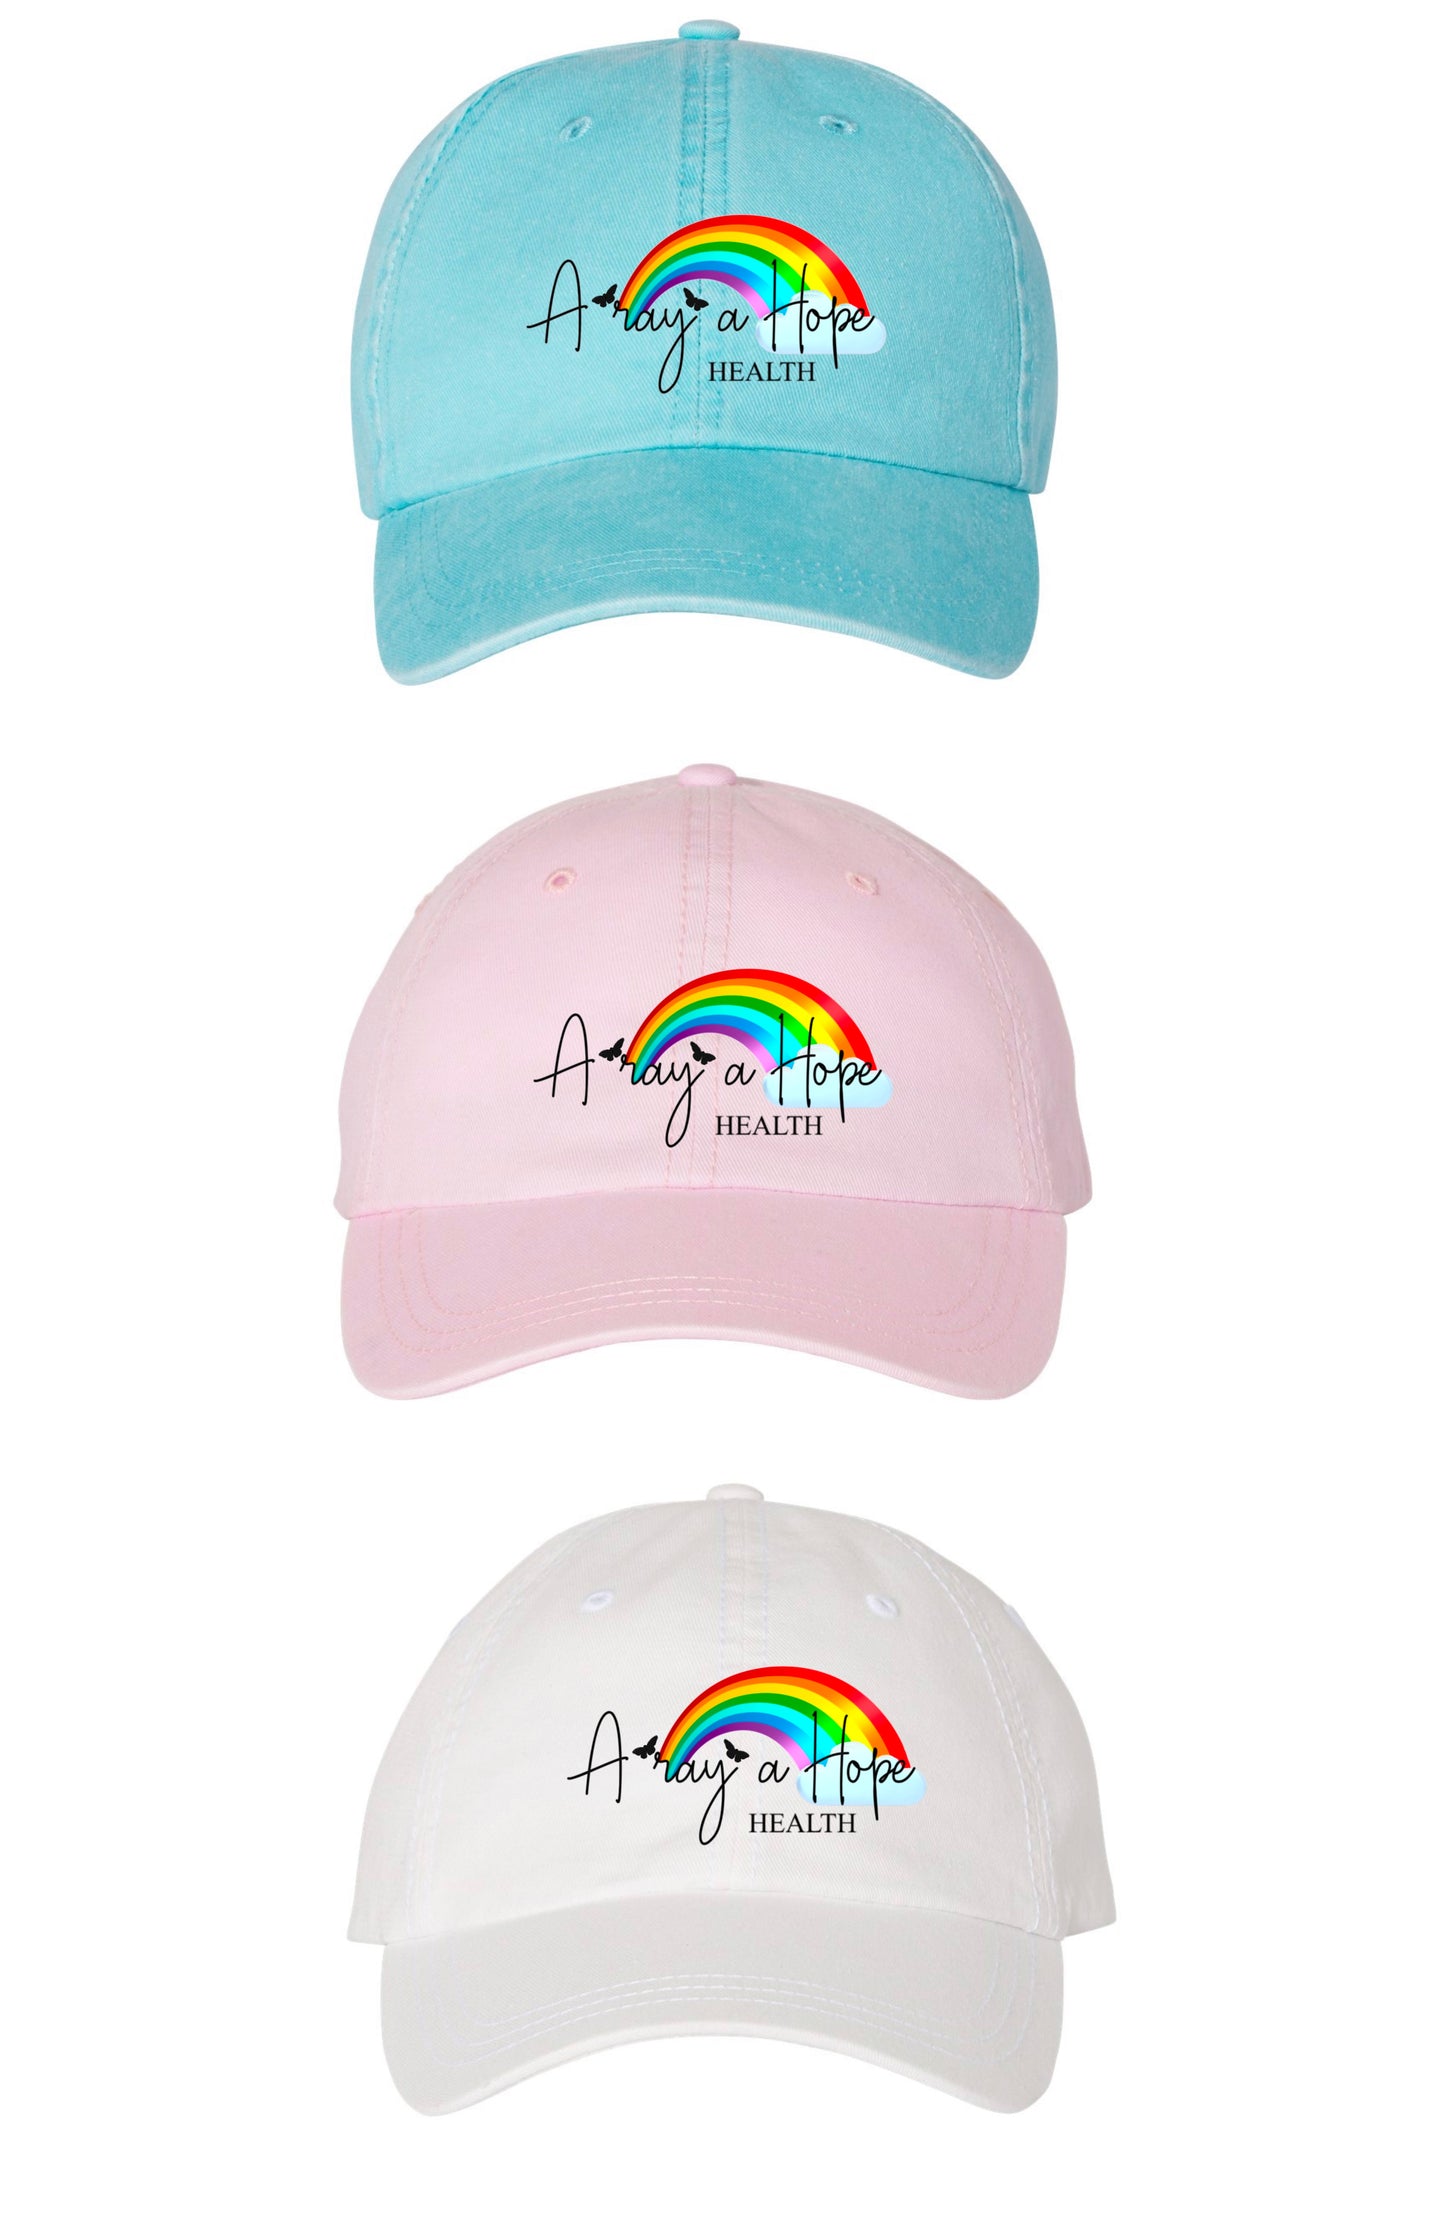 A Ray a Hope Cap